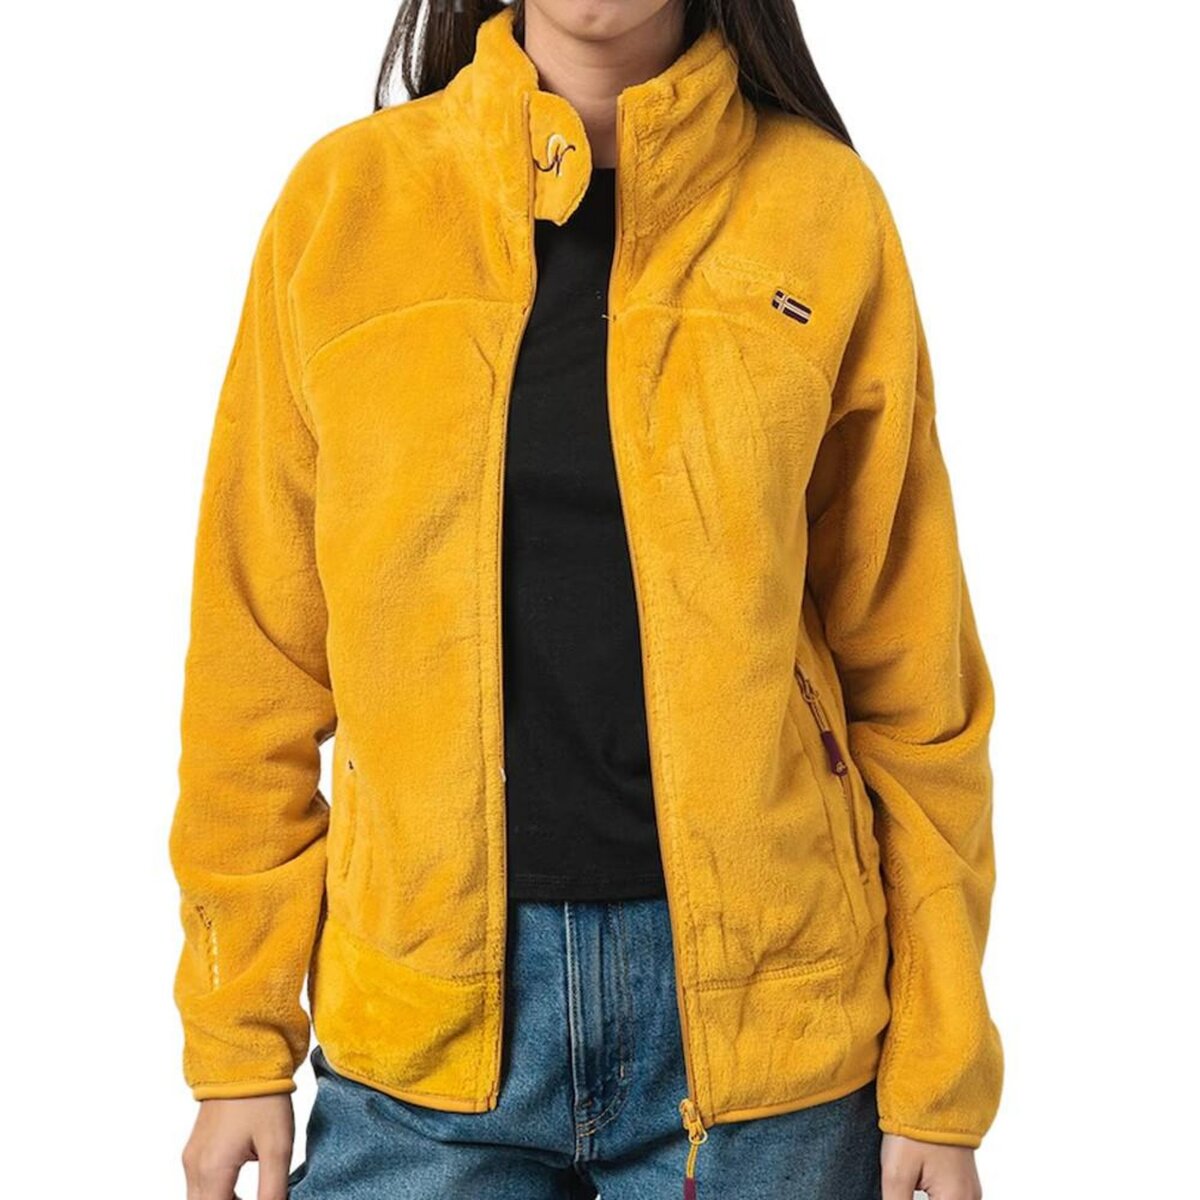 GEOGRAPHICAL NORWAY Veste polaire Jaune Femme Geographical Norway Upaline